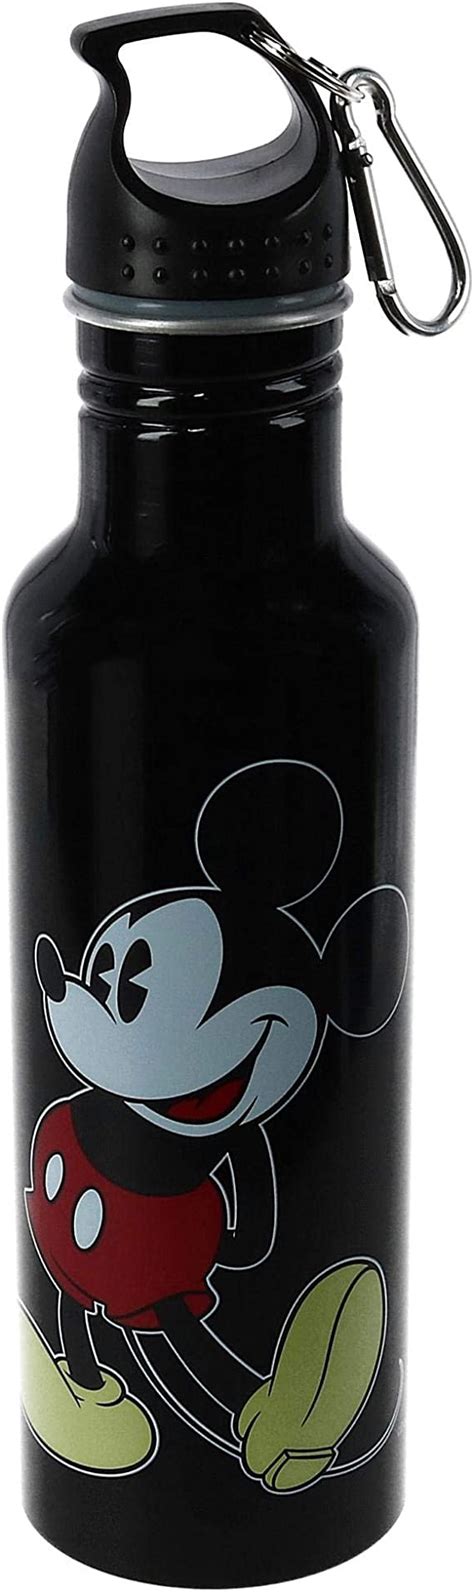 Jerry Leigh Disney Mickey Mouse Aluminum Water Bottle With Carabiner